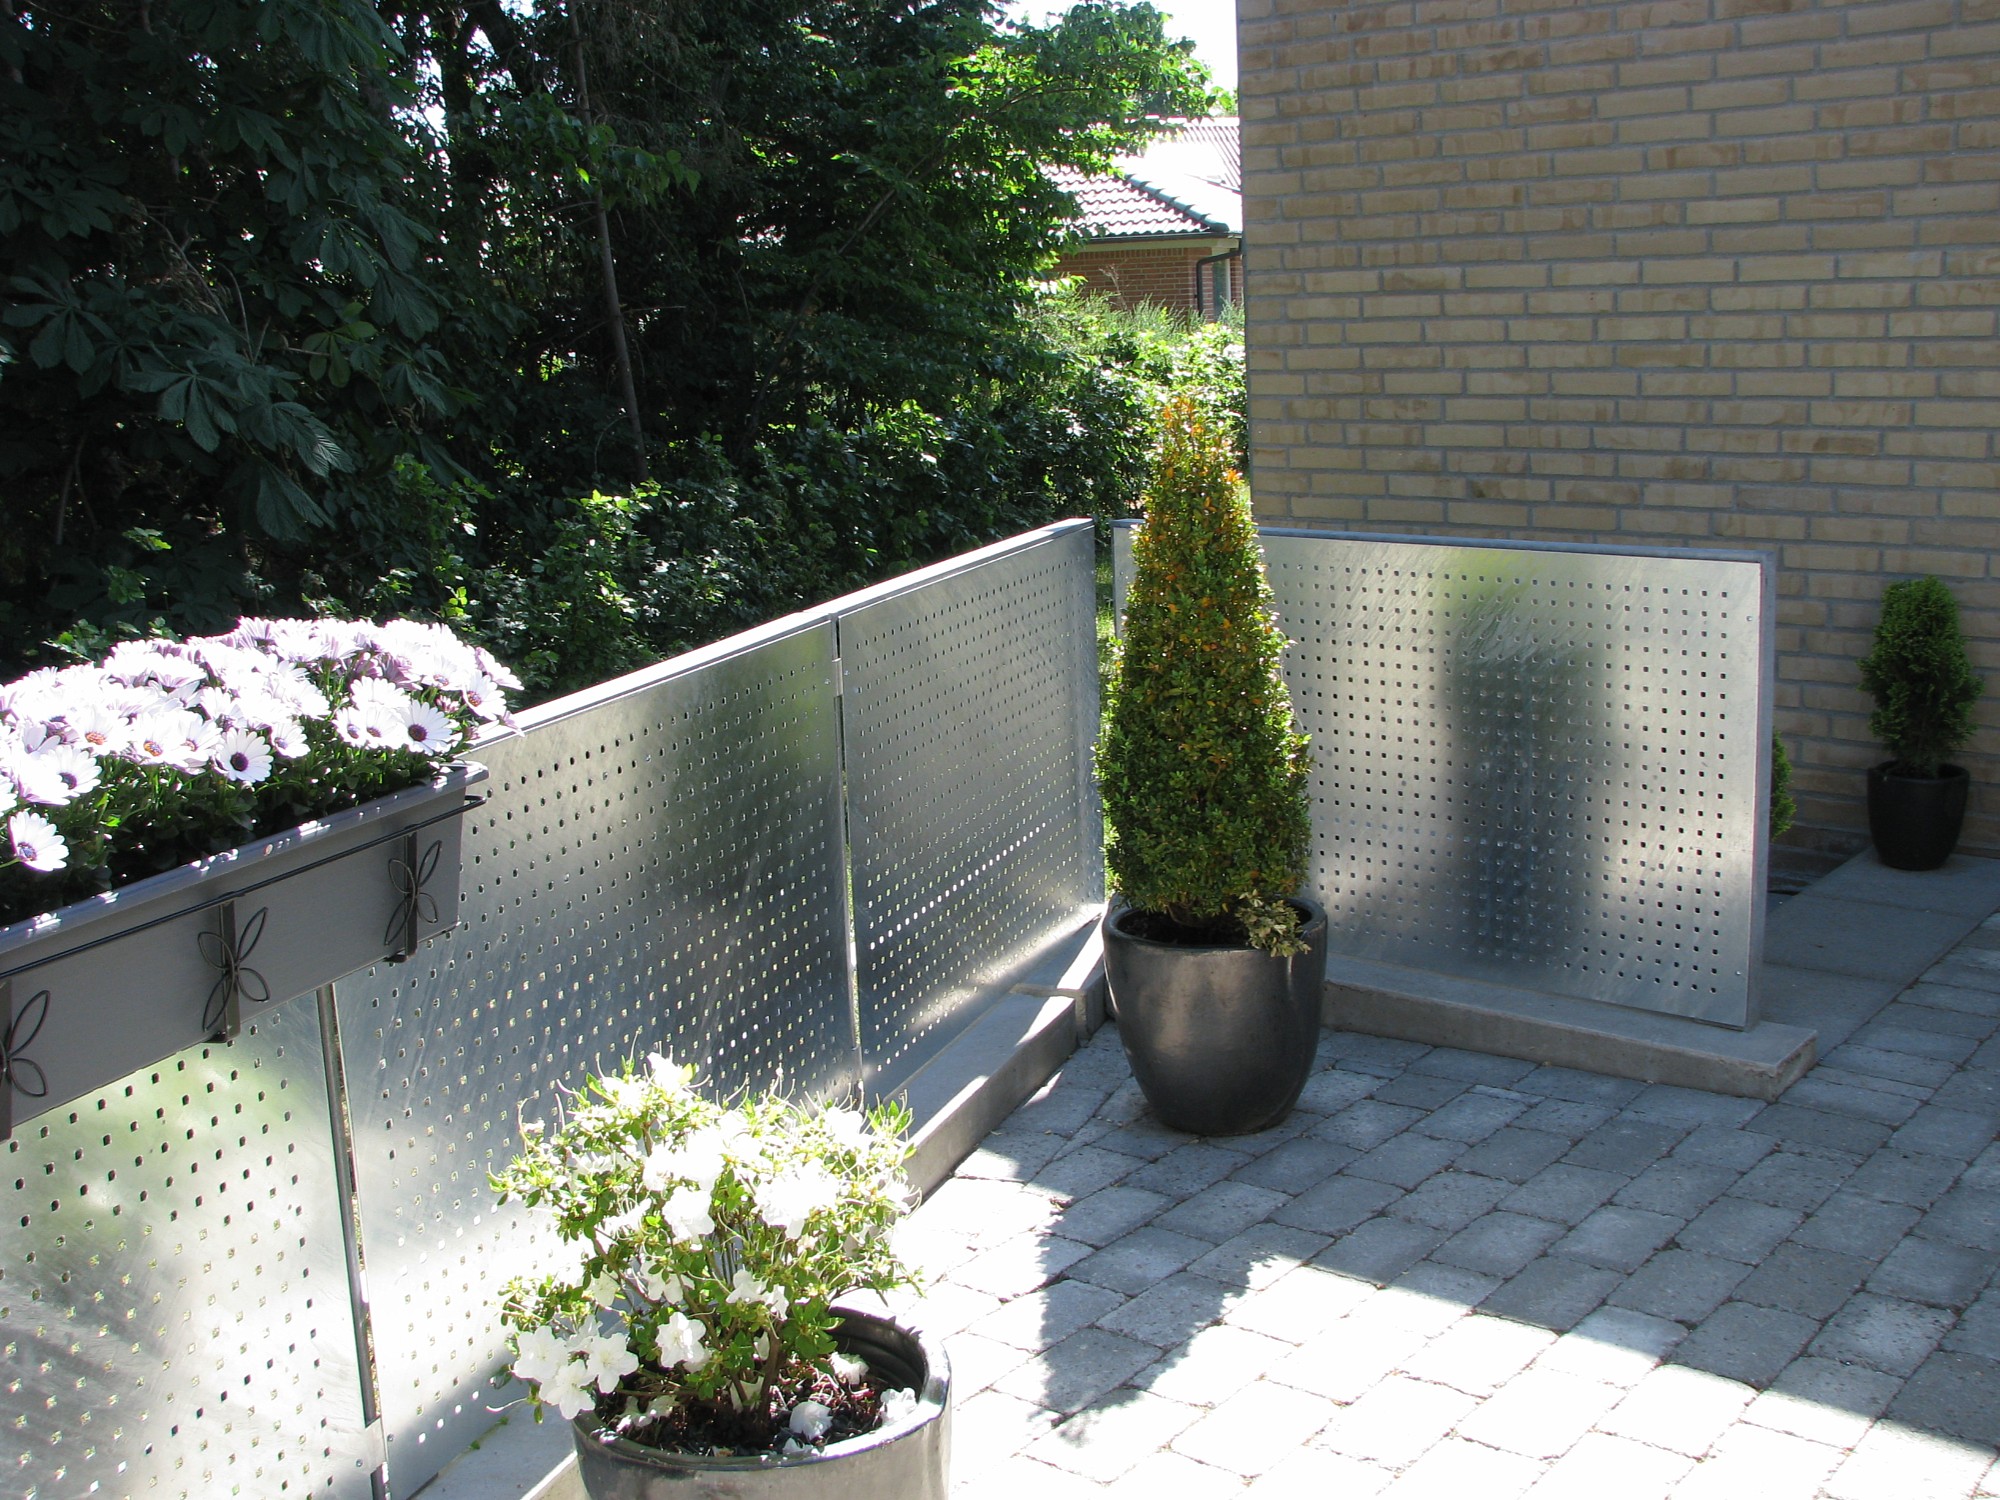 Perforated sheets from RMIG used for balustrades